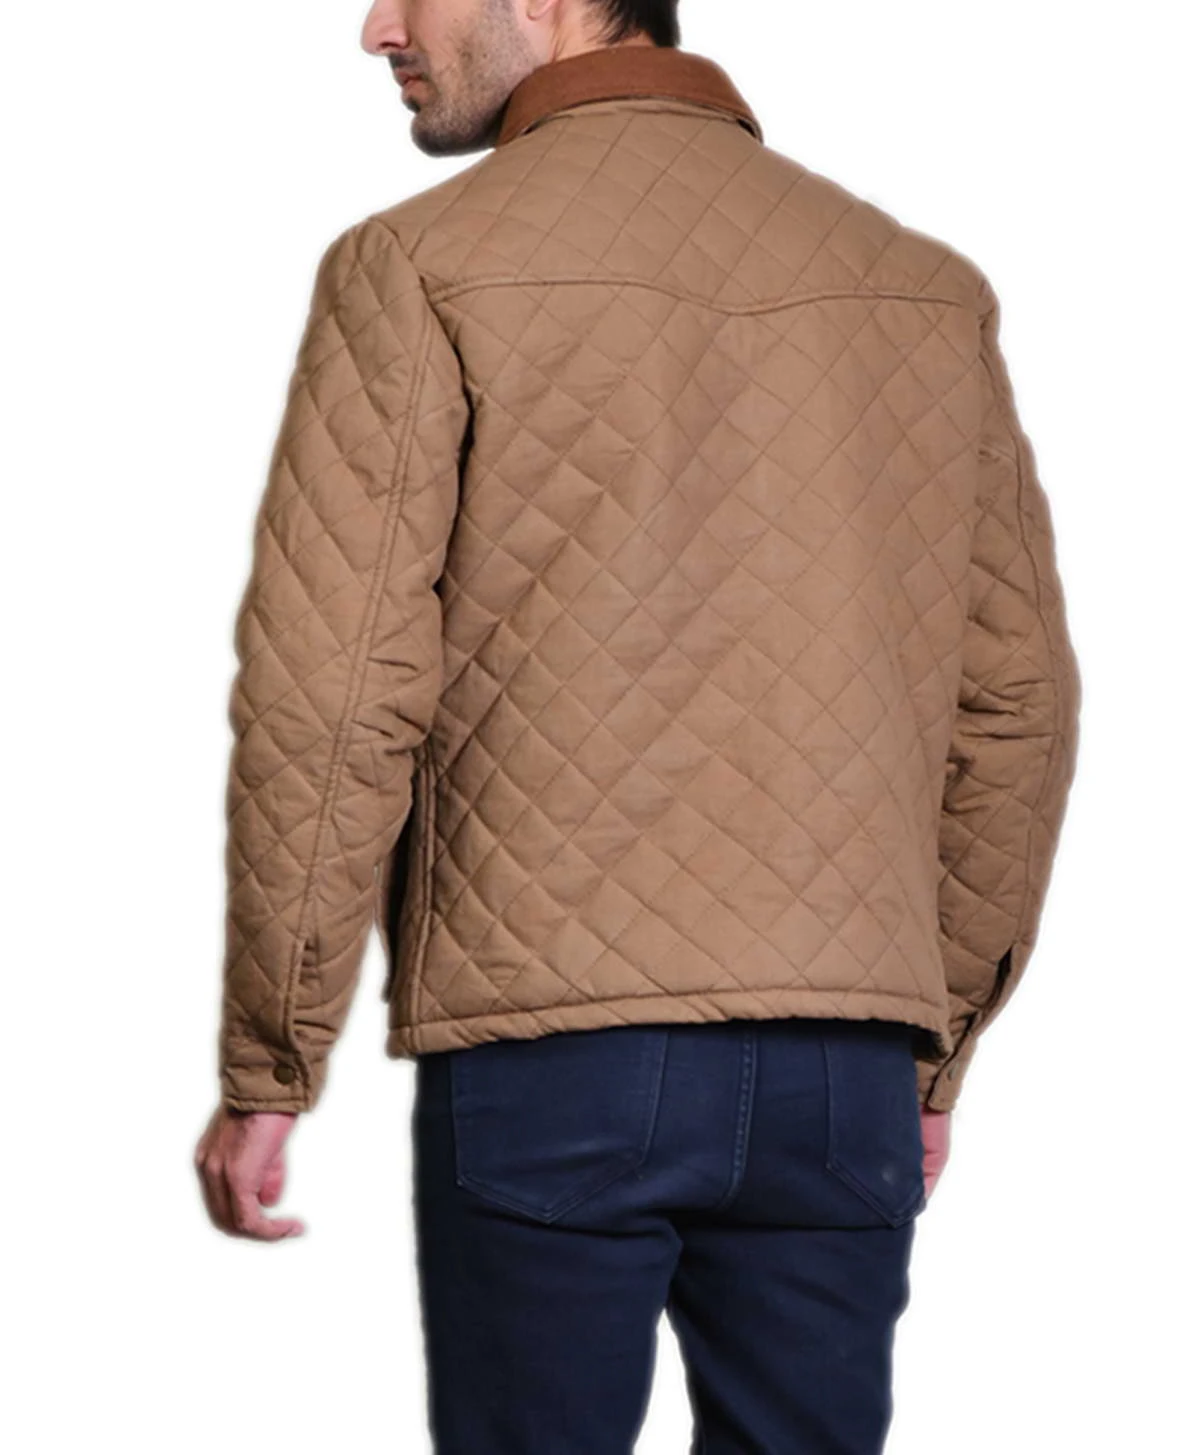 John-Quilted British Jackets Yellowstone S04 John Dutton Brown Quilted Jacket | Kevin Costner Yellowstone Brown Quilted Cotton Jacket